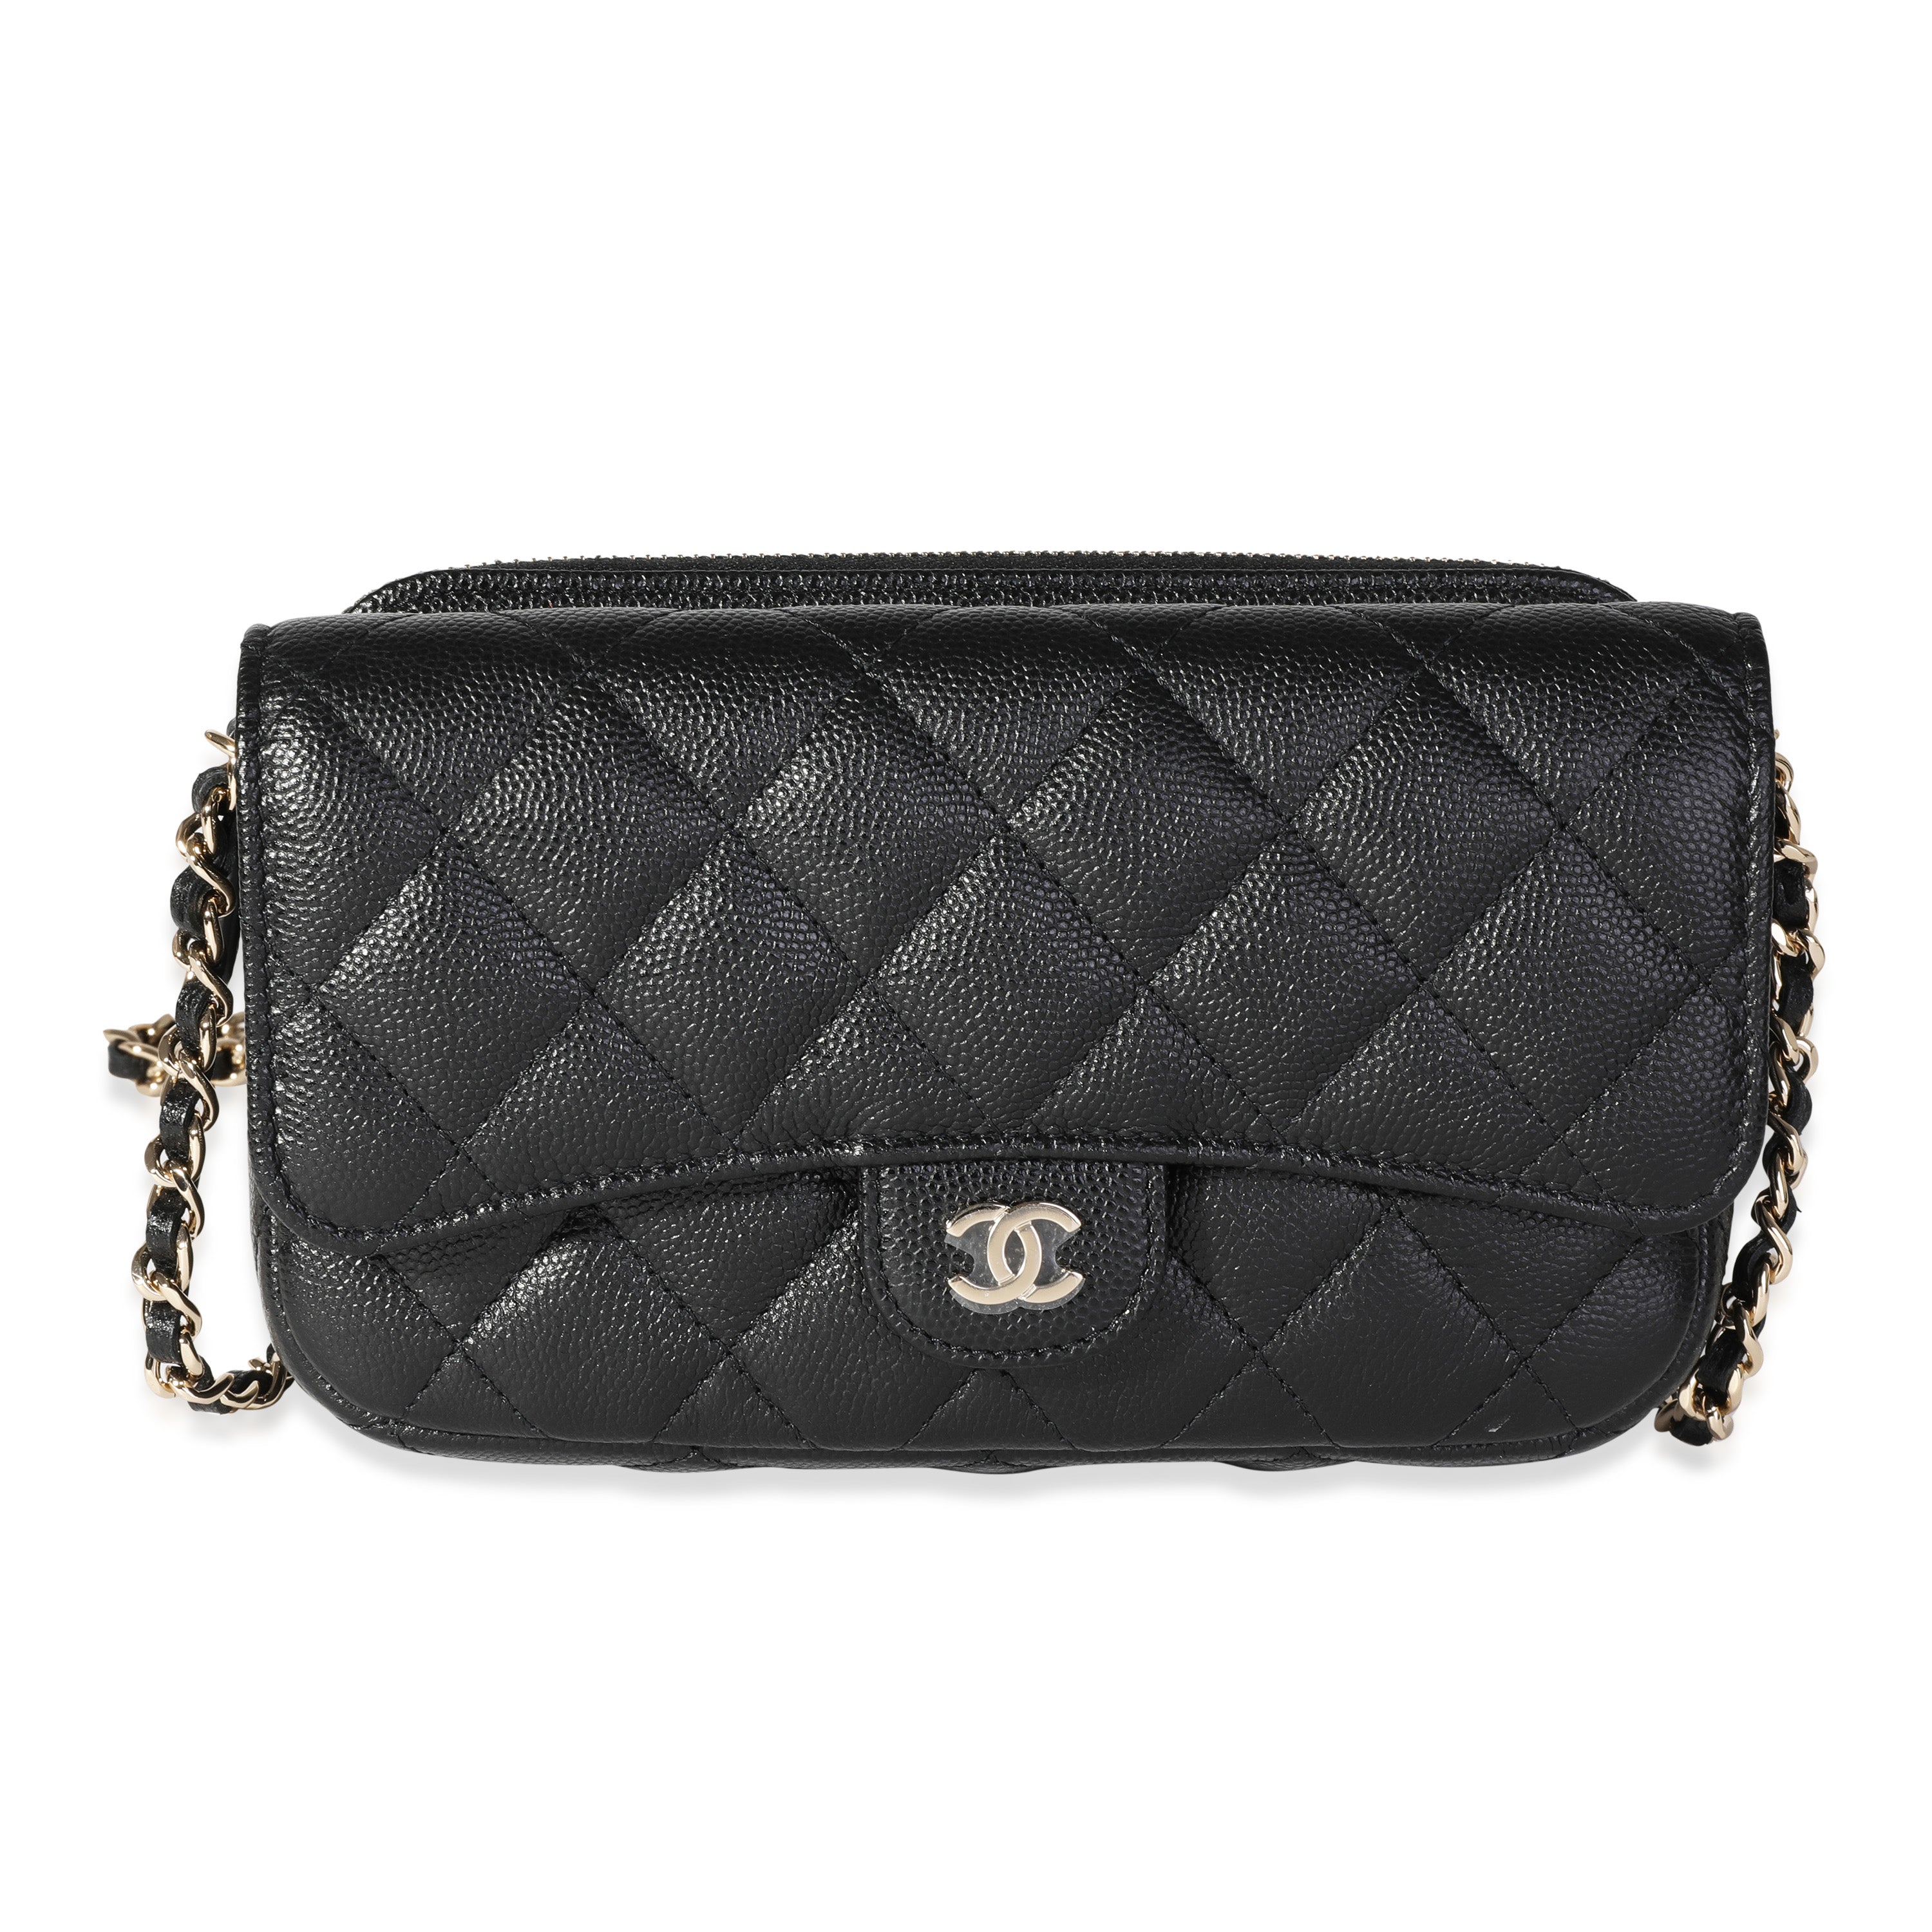 Chanel Black Quilted Caviar Phone Holder with Chain